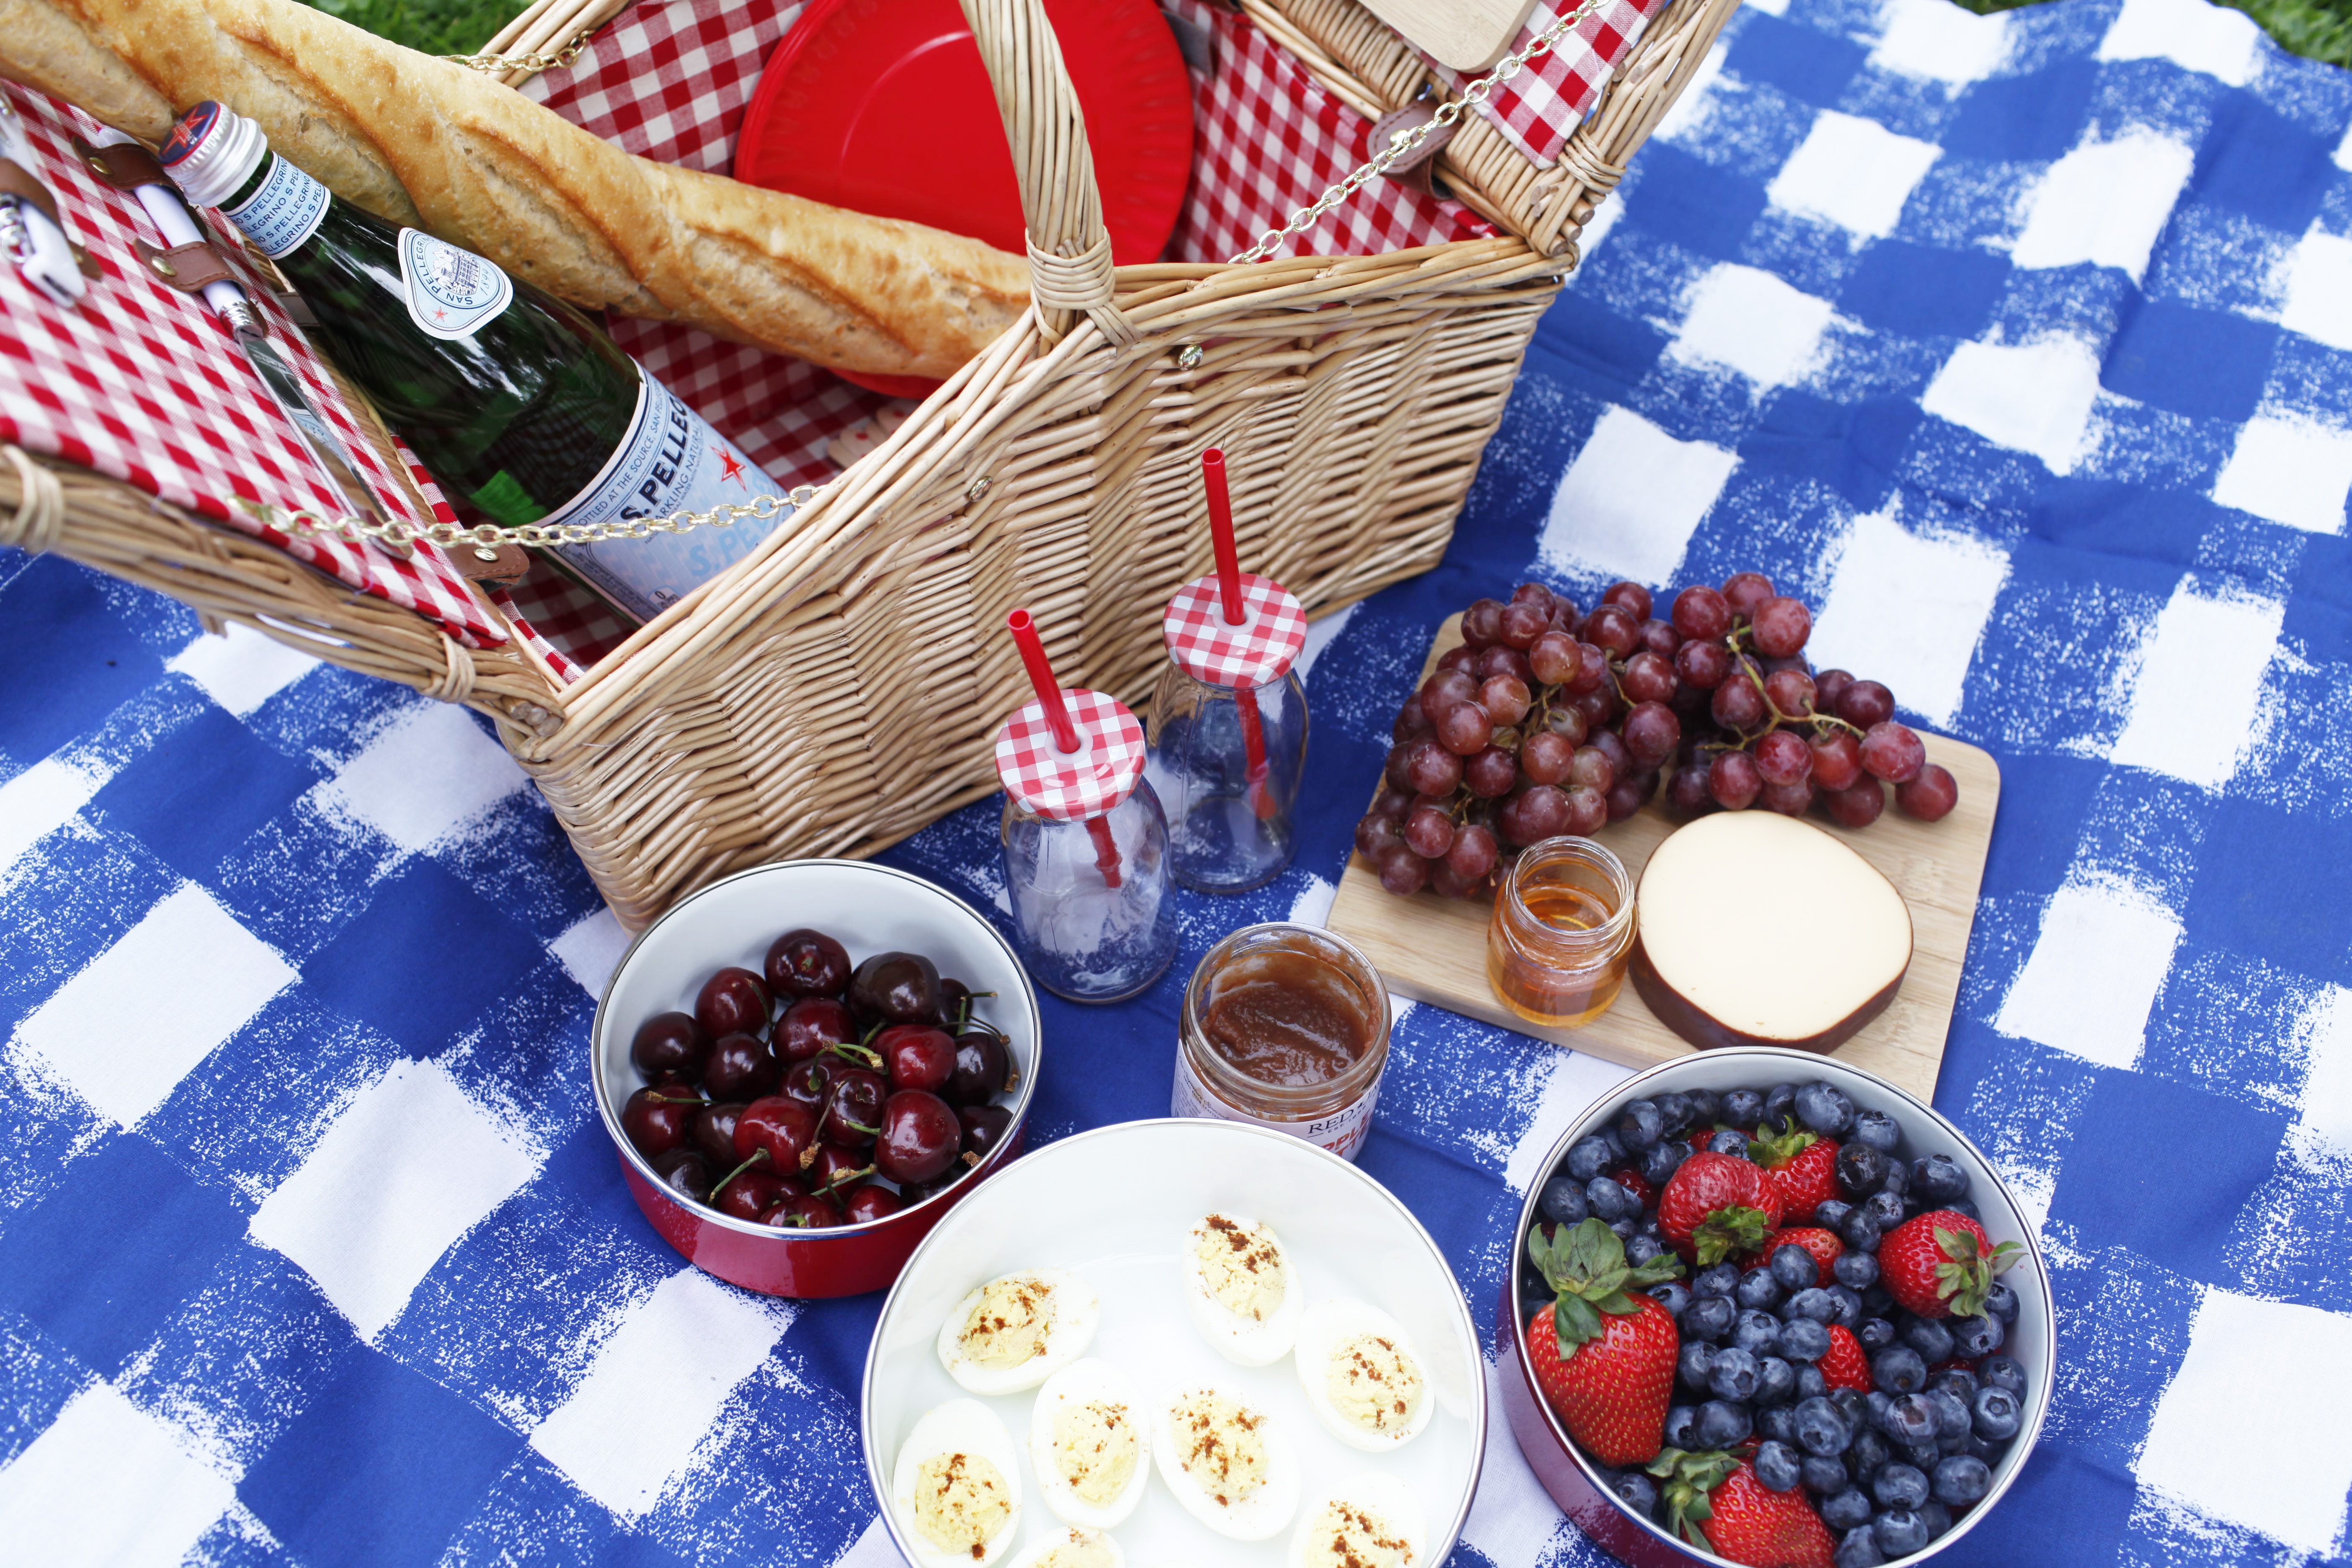 picnic in the park with picnic blanket and picnic basket in Central Park during the Summer